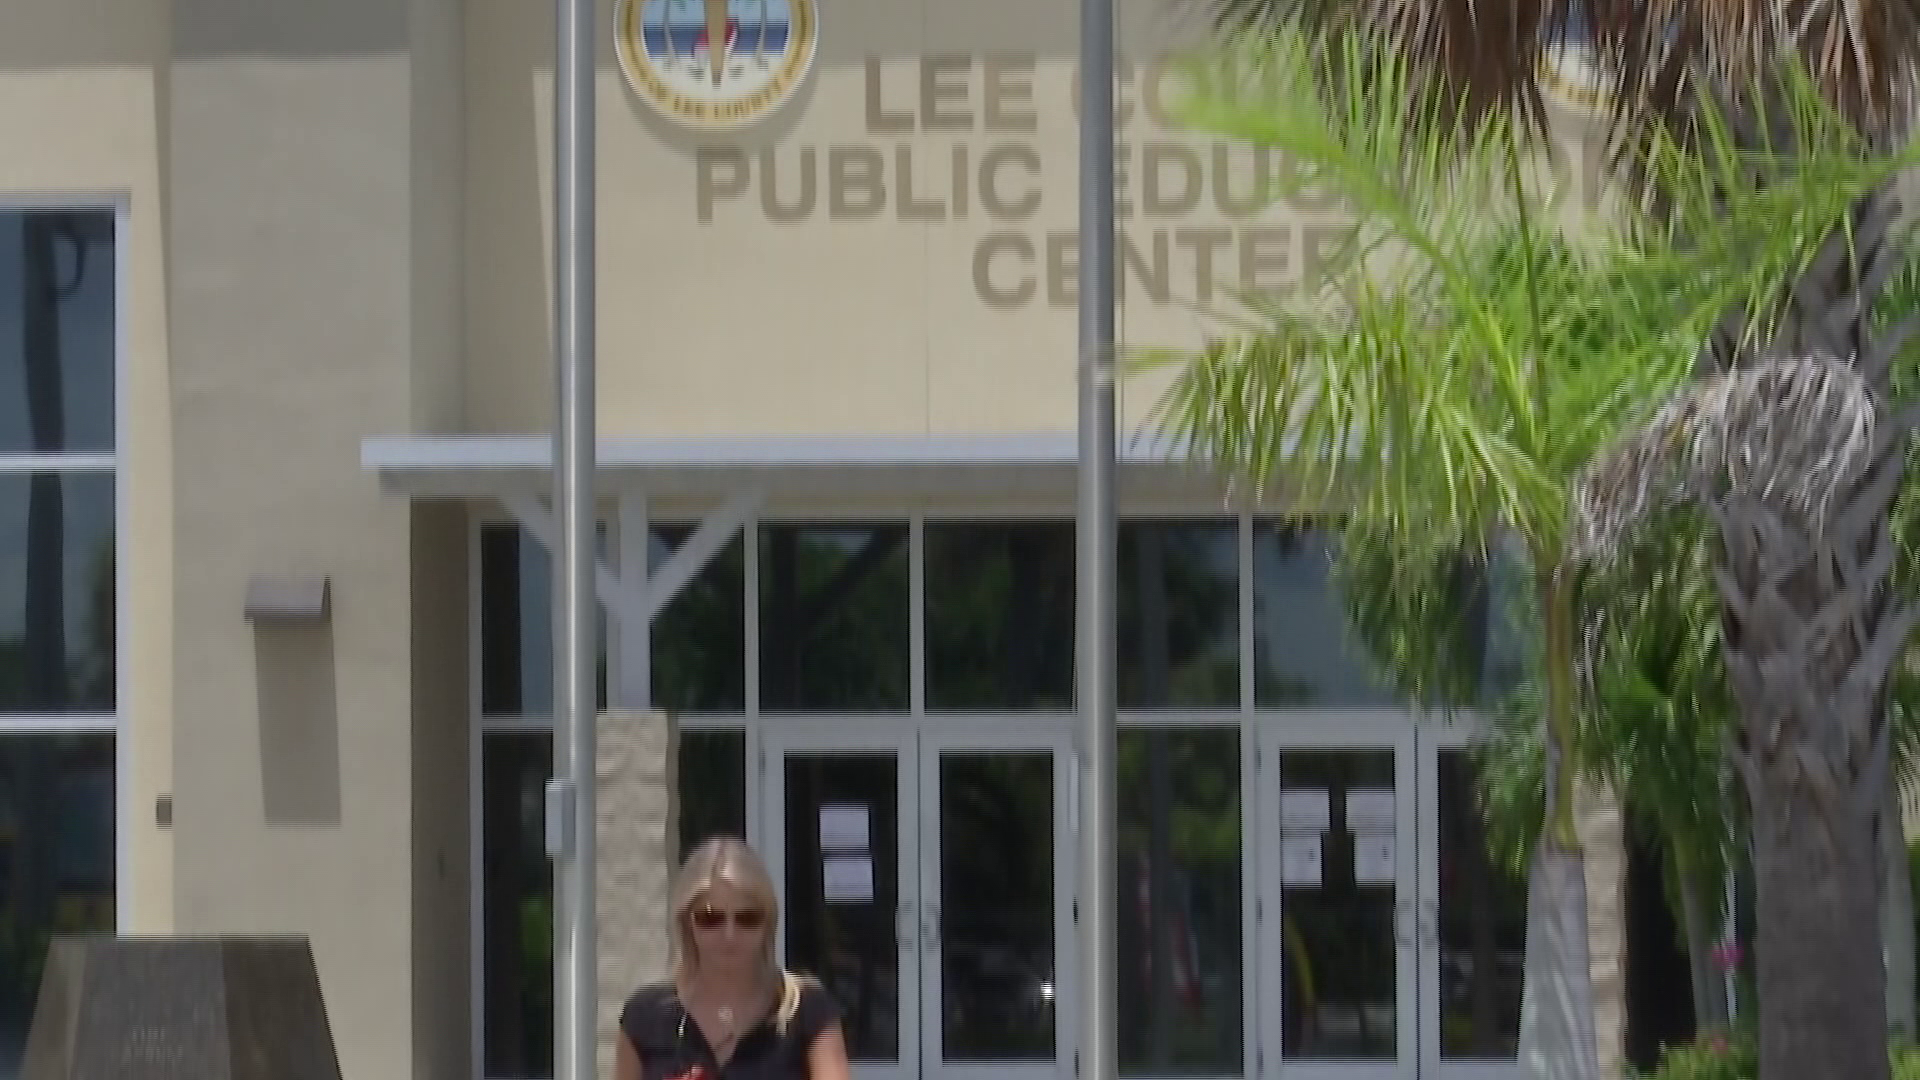 Lee County school district temporarily closes student enrollment center